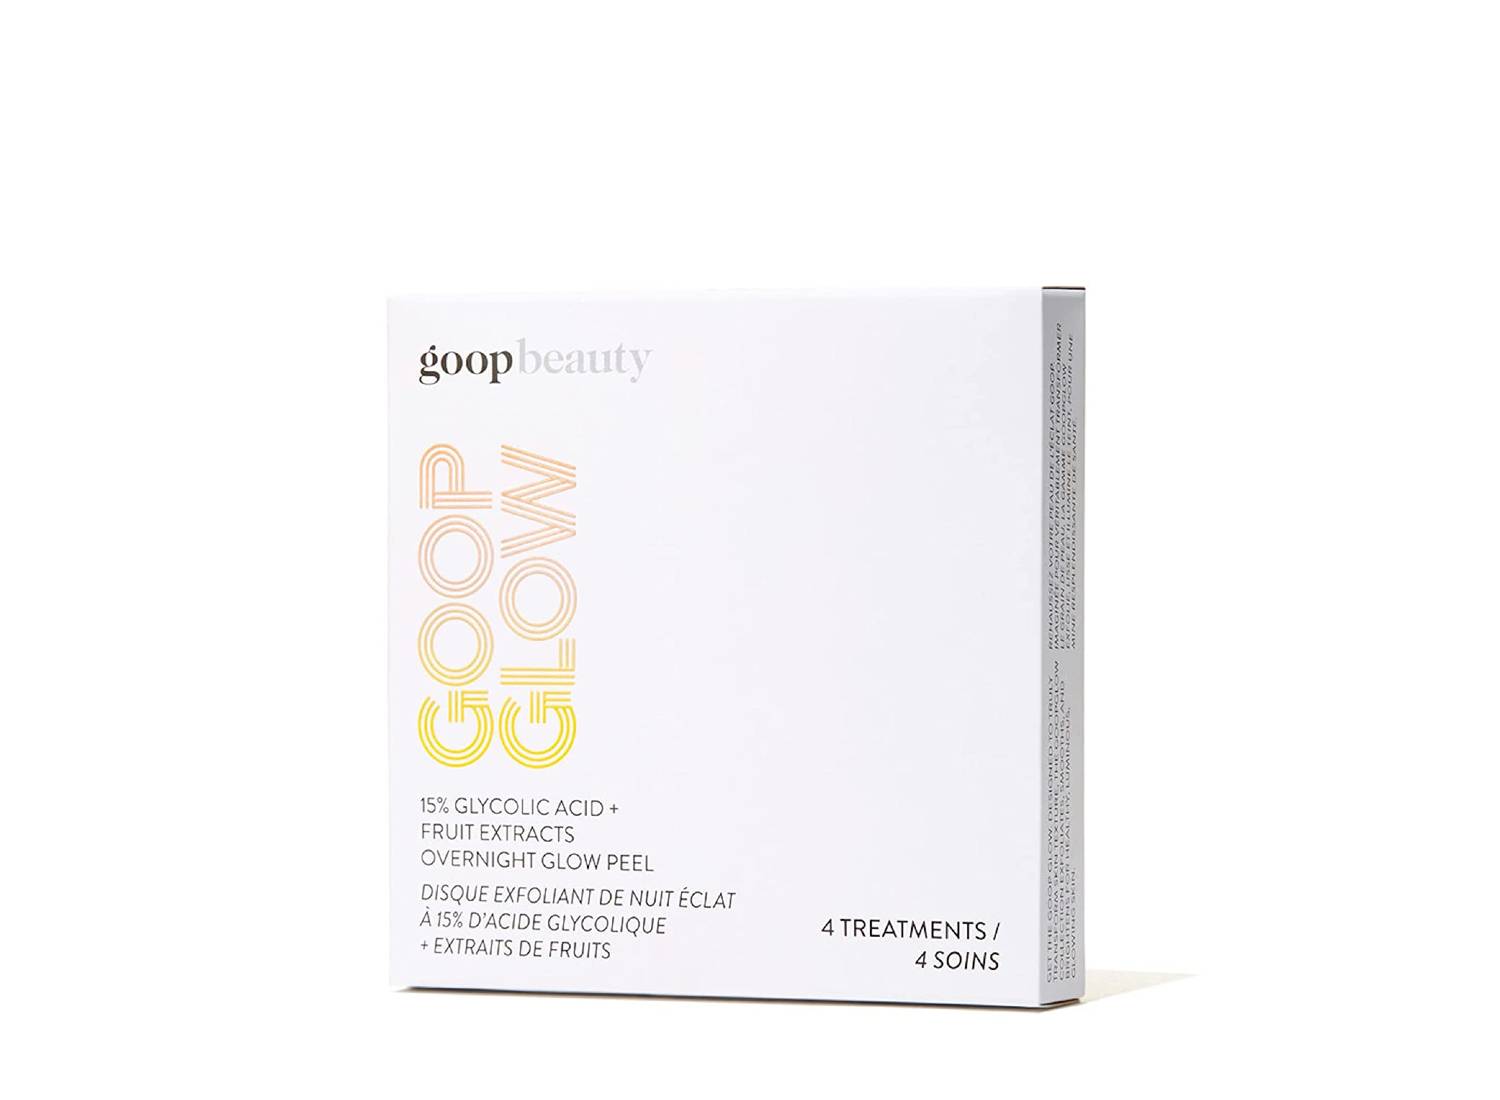 Box of goop's goopglow glycolic acid overnight peel pads for face